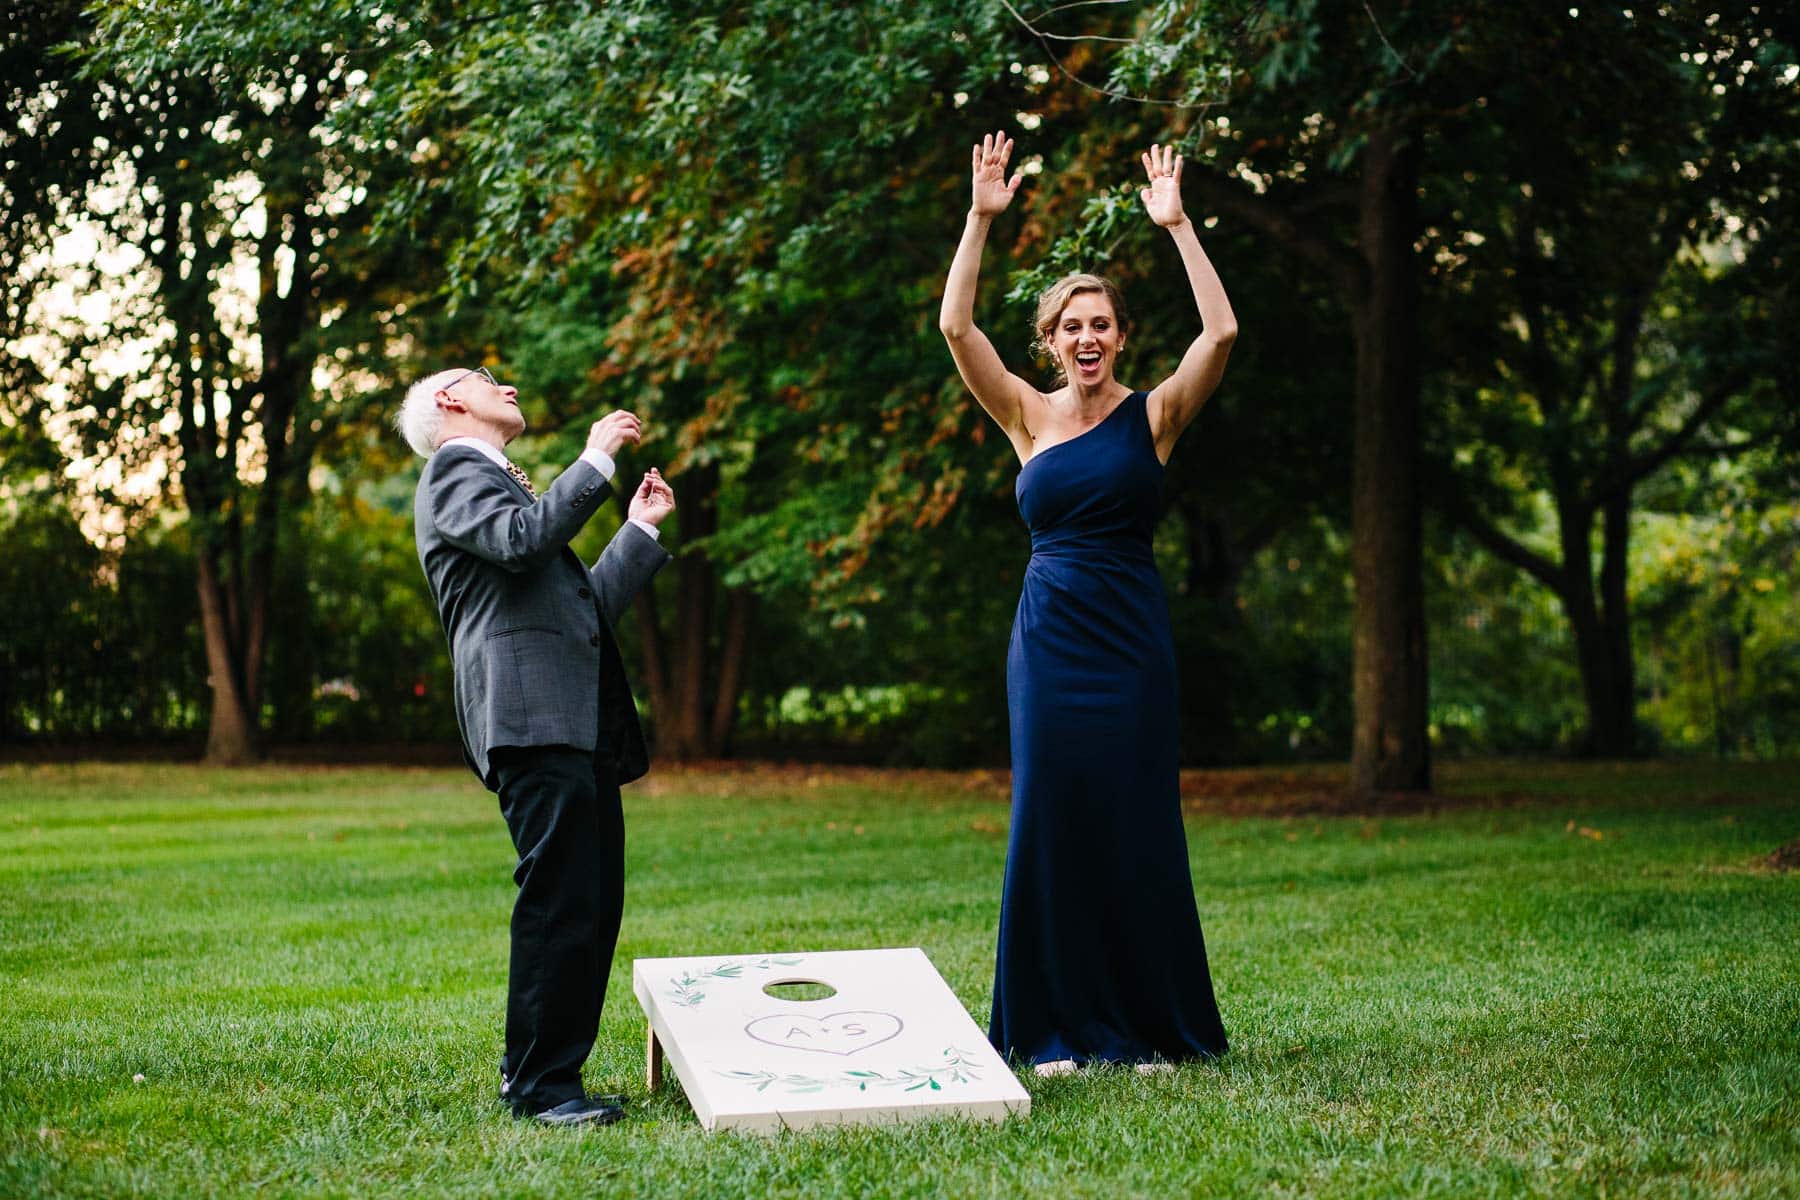 lawn games during cocktail hour | Kelly Benvenuto Photography